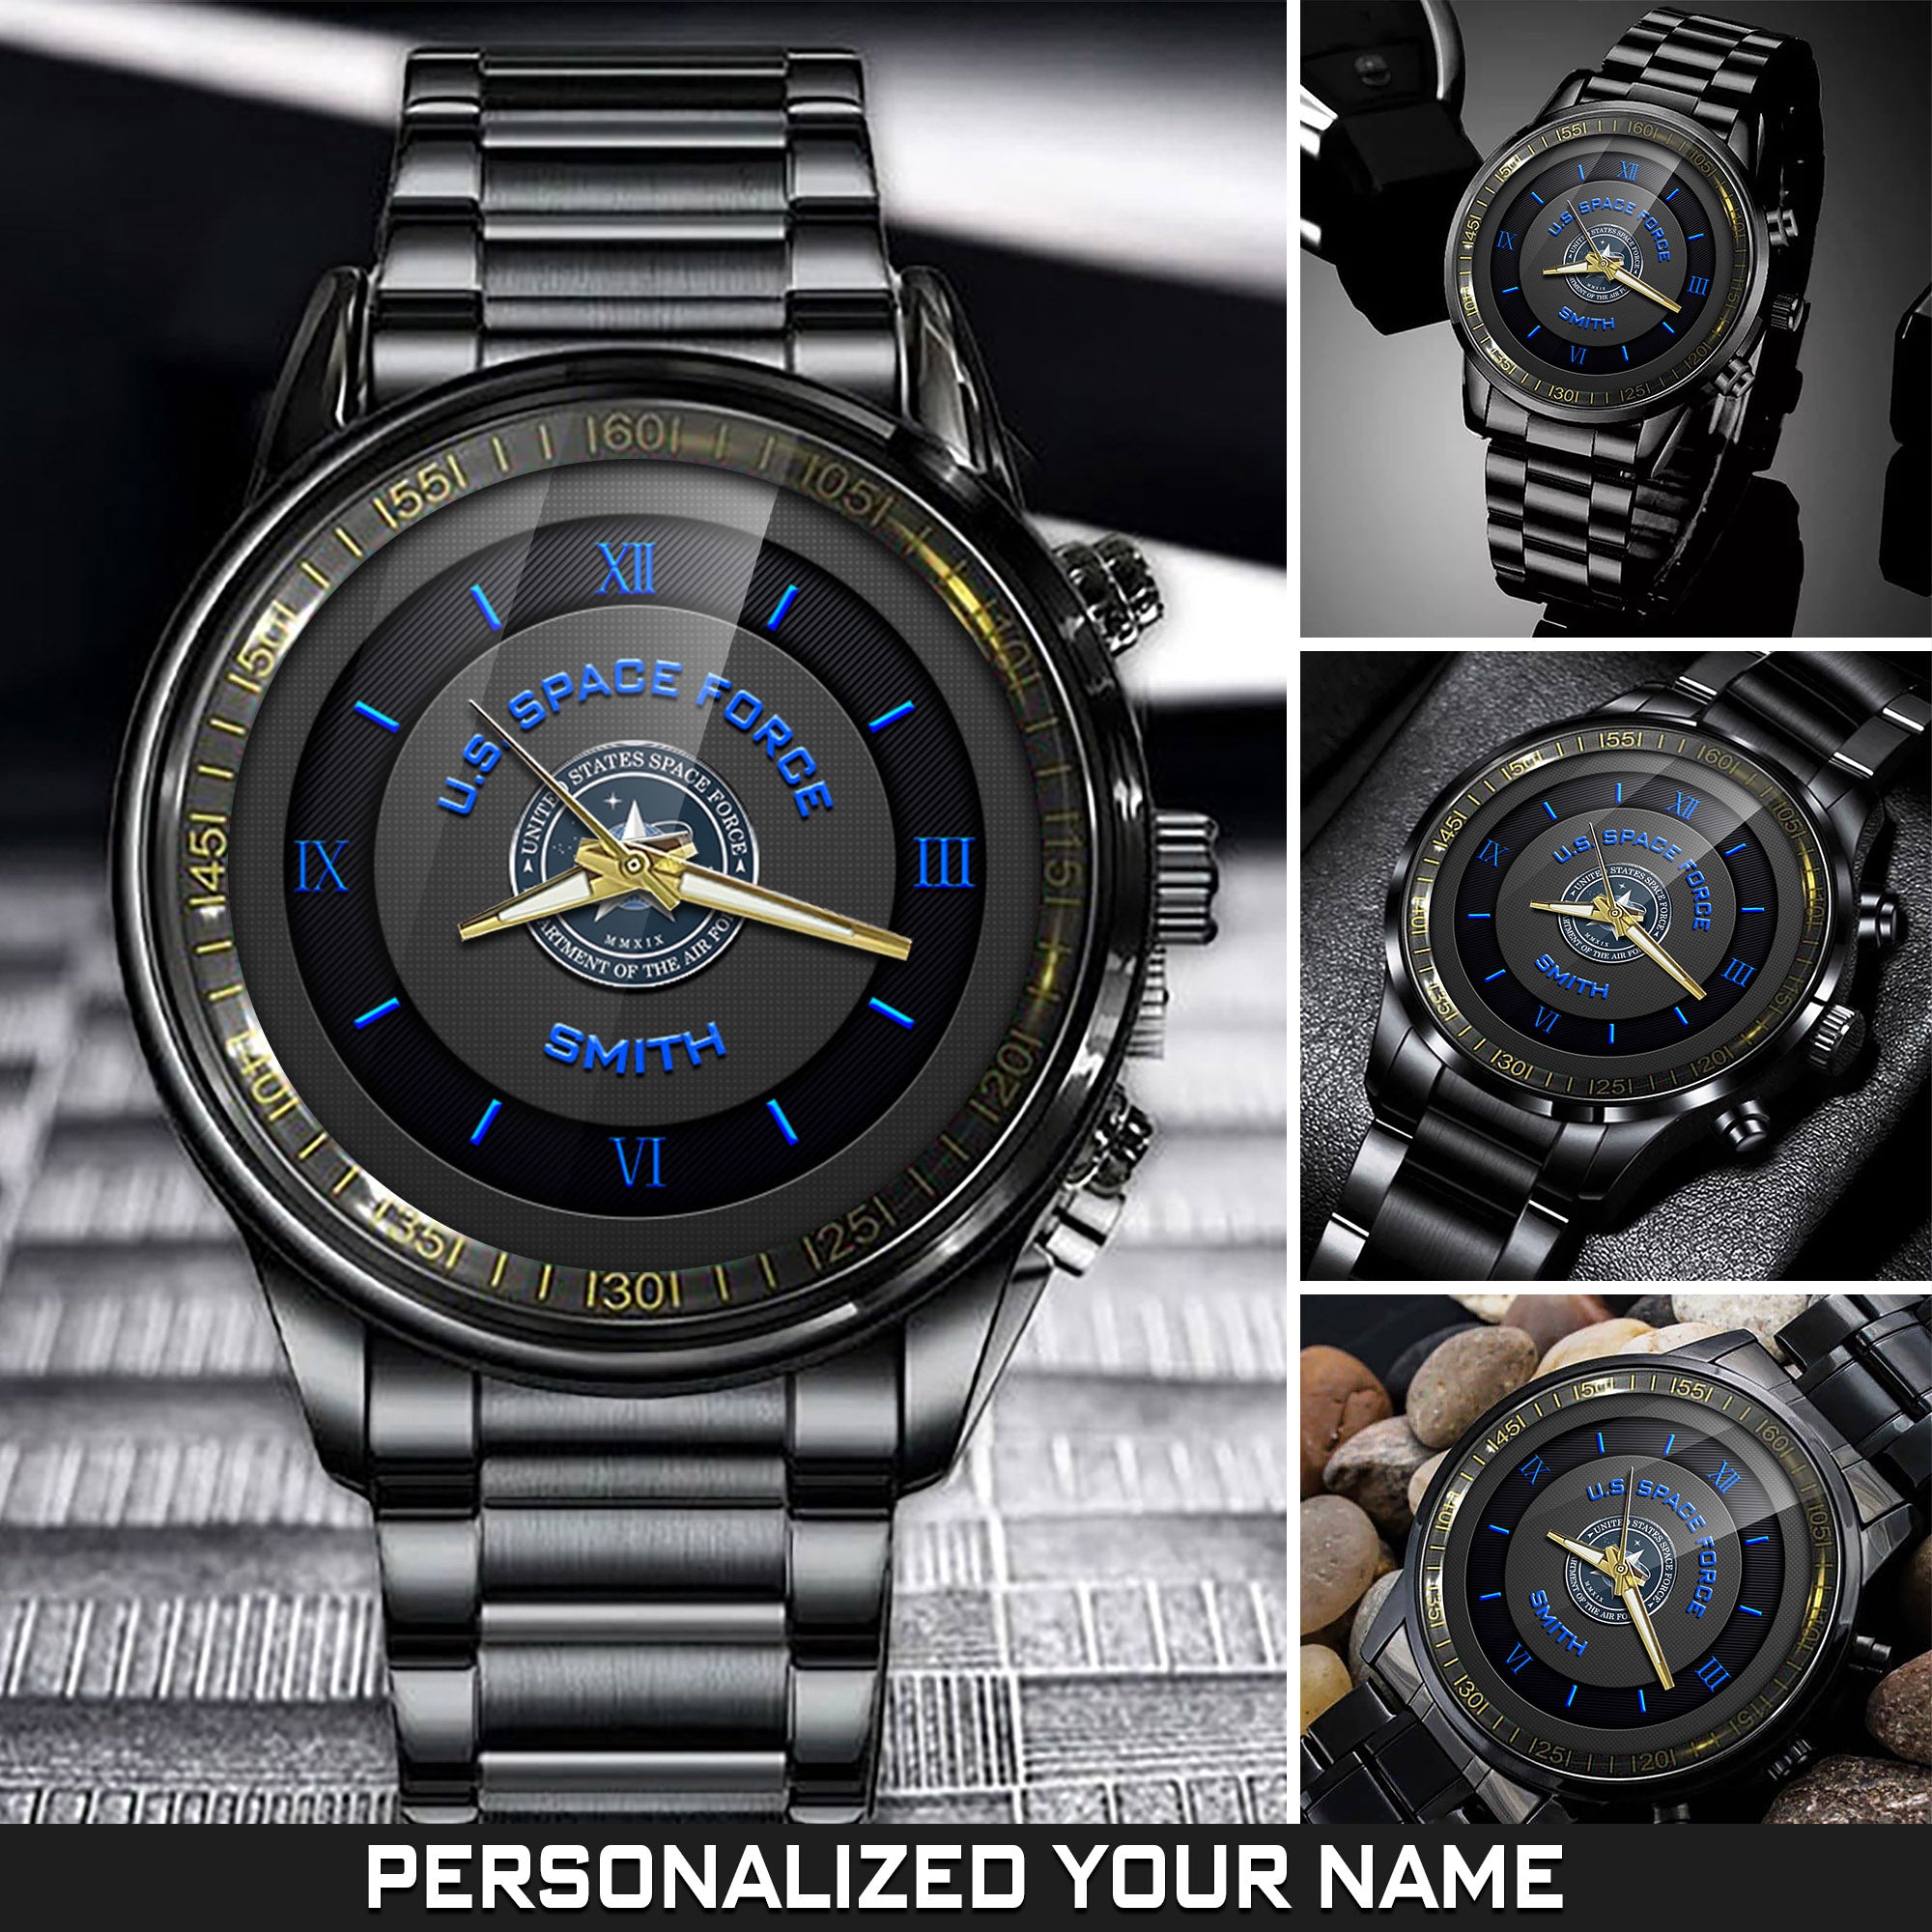 U.S. Space Force Black Fashion Watch Thanks For Your Service Space Force Watch Personalized Military Gift